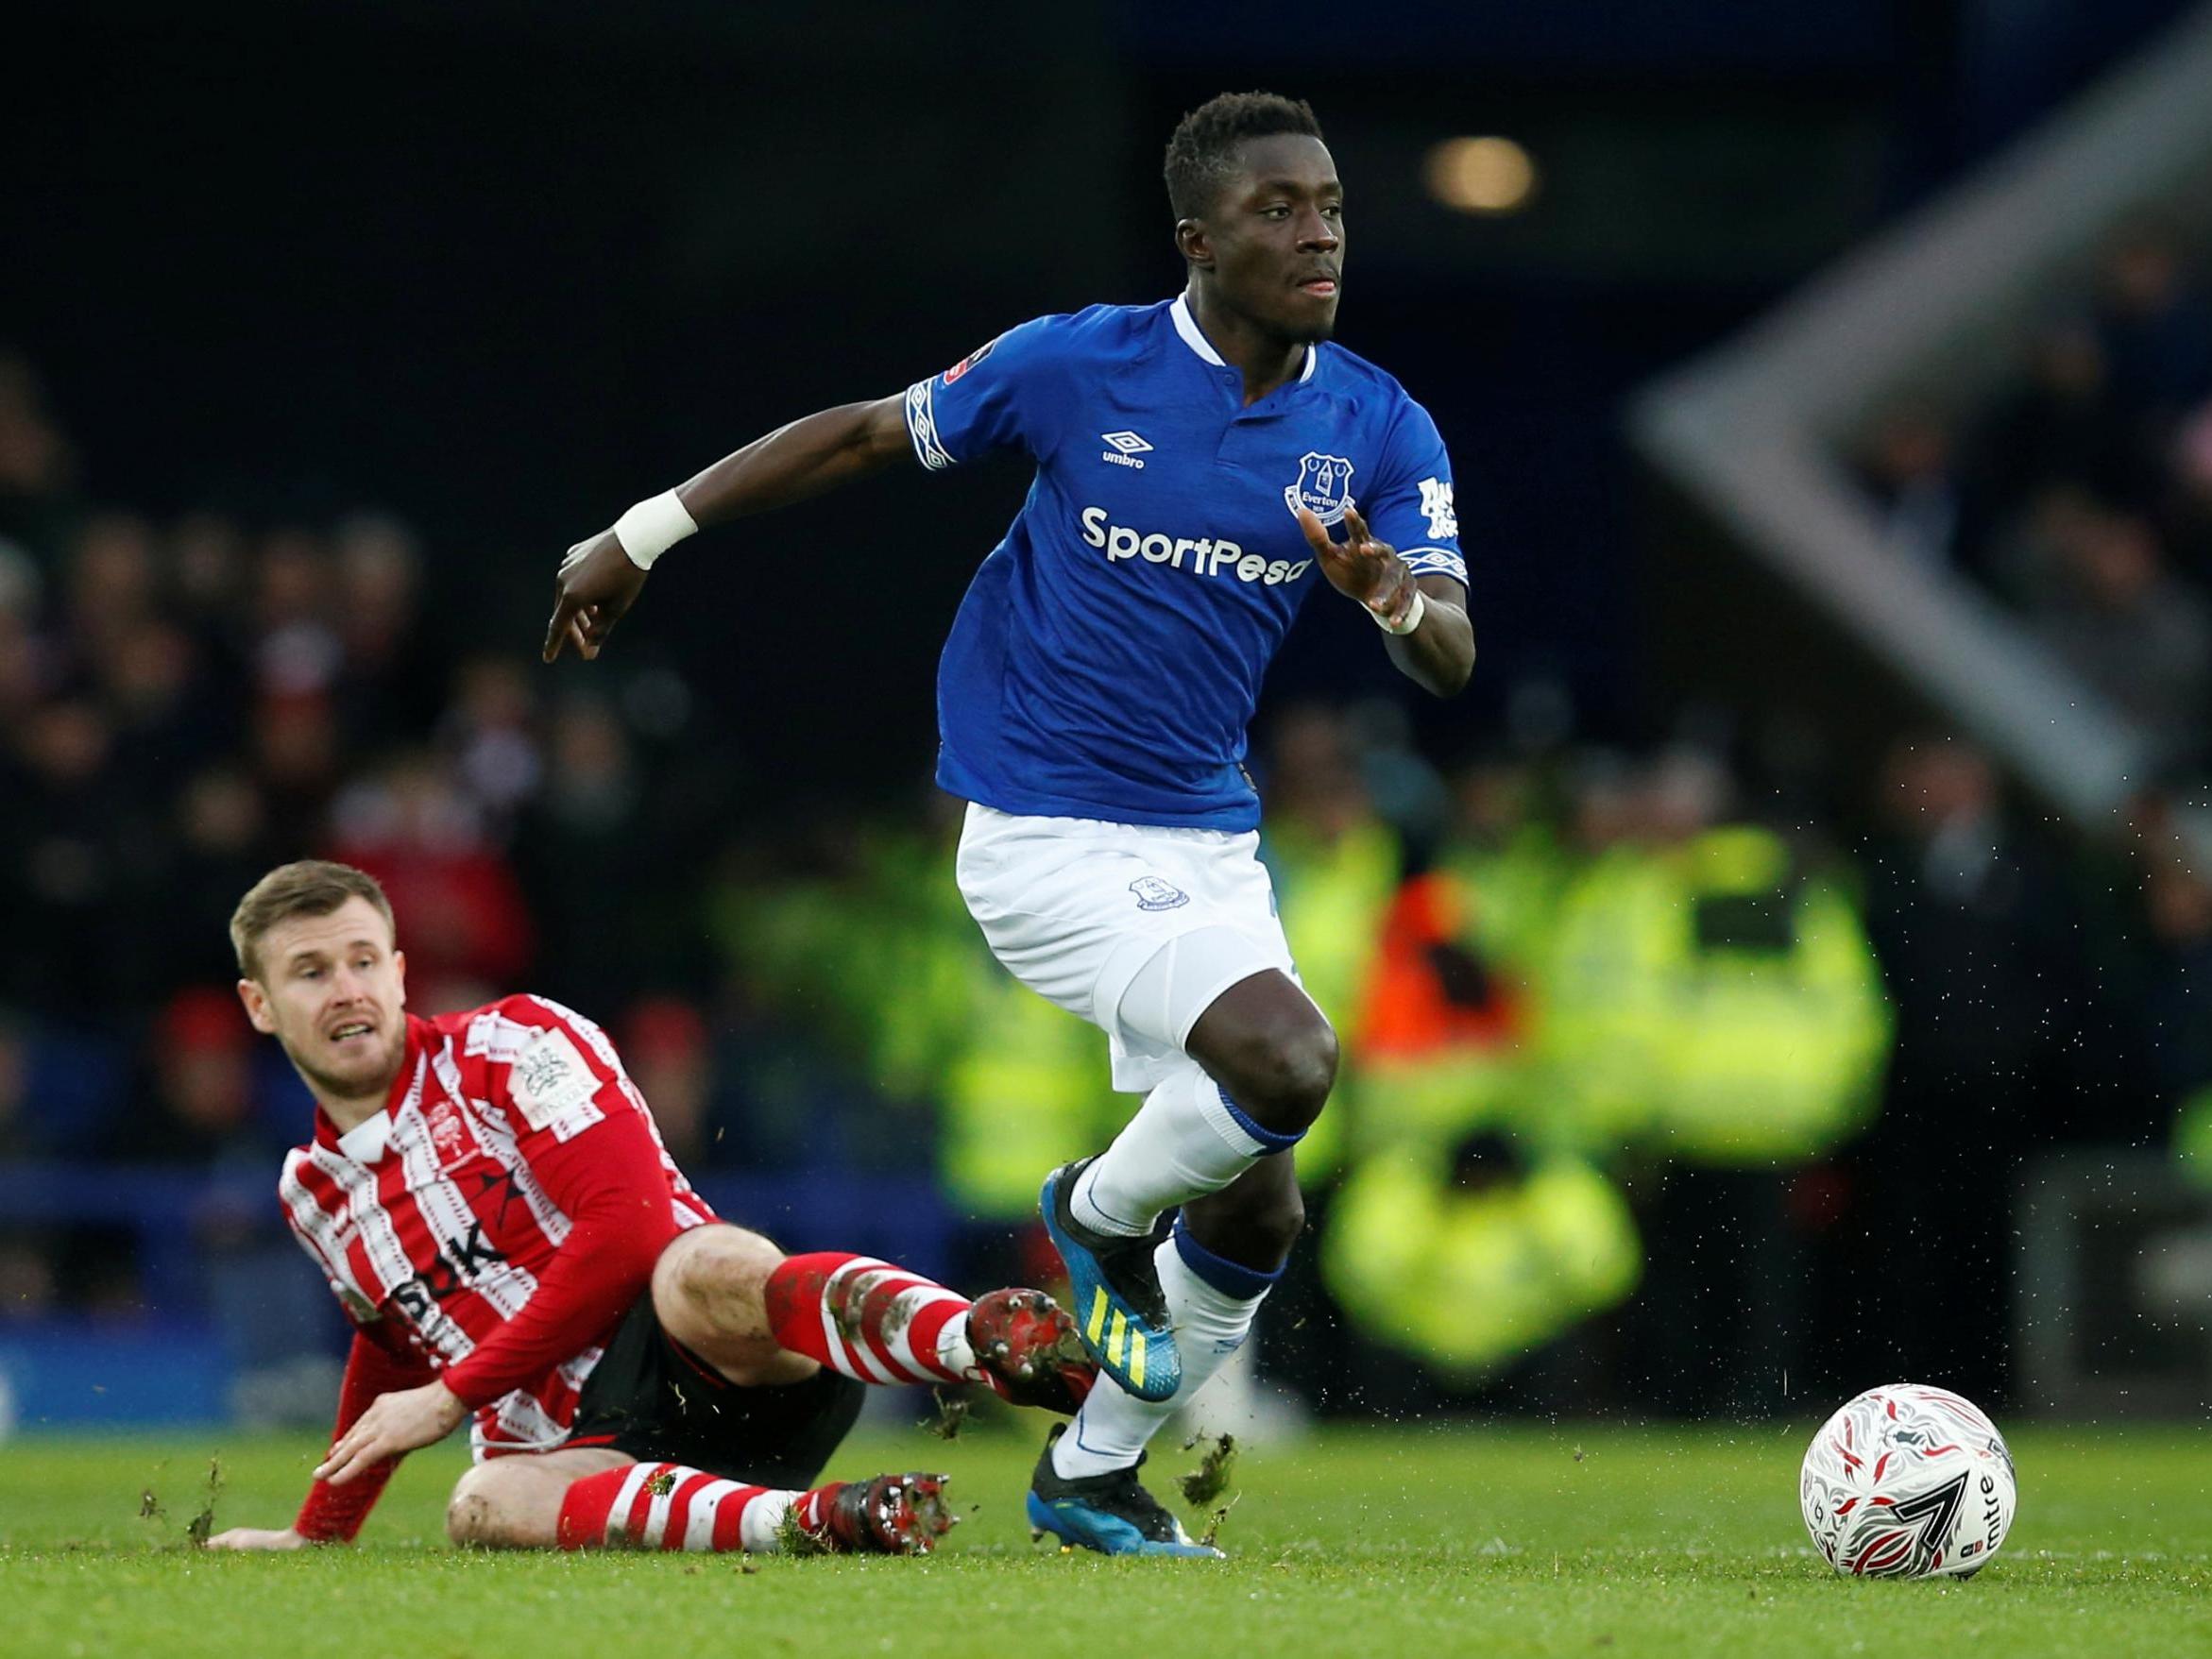 Everton's Idrissa Gueye wanted to depart Goodison Park (Reuters)